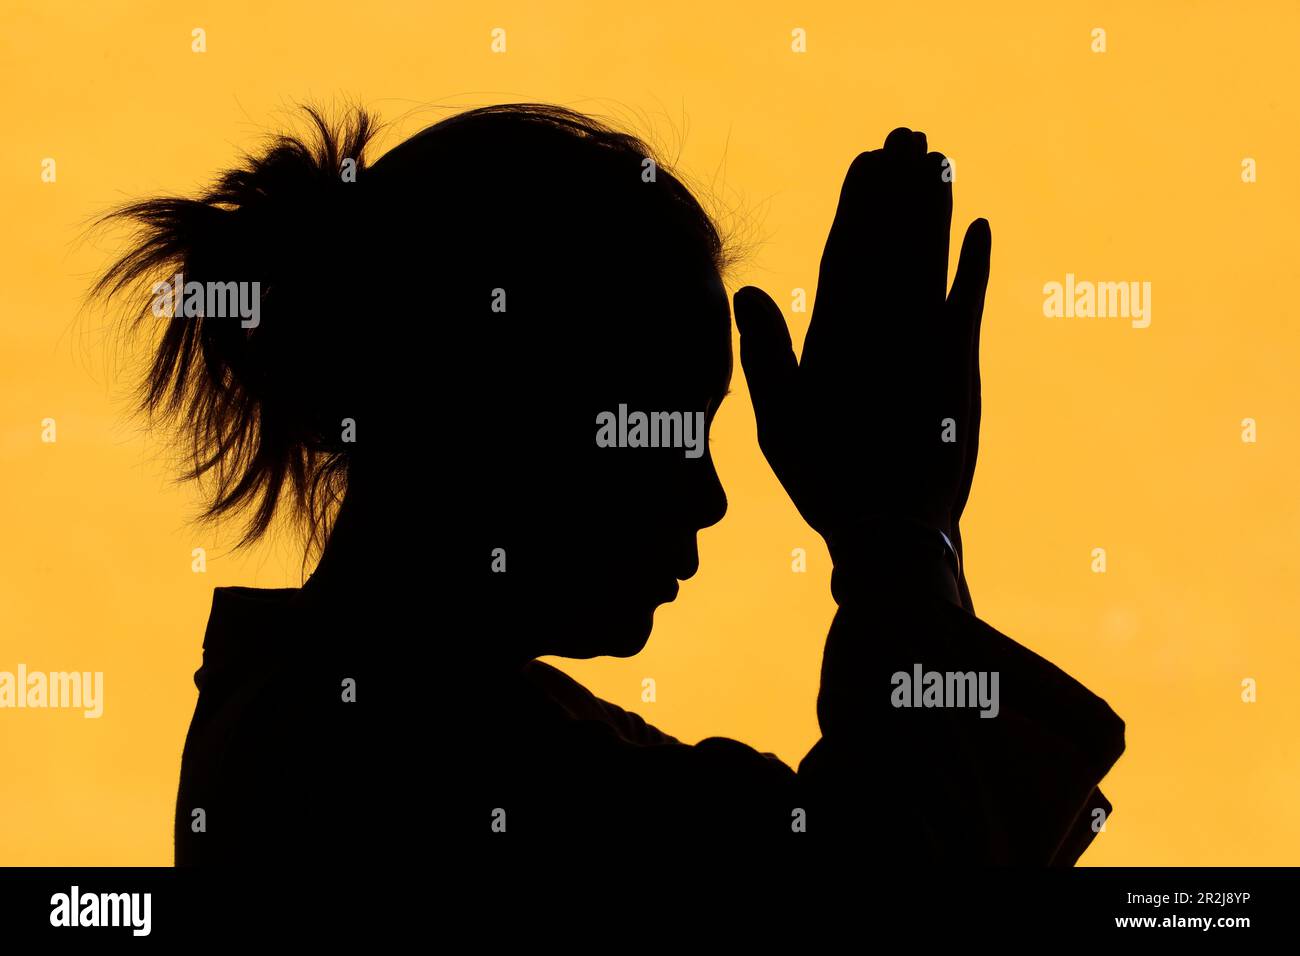 Silhouette of woman praying in temple Faith and spirituality concept, Vietnam, Indochina, Southeast Asia, Asia Stock Photo